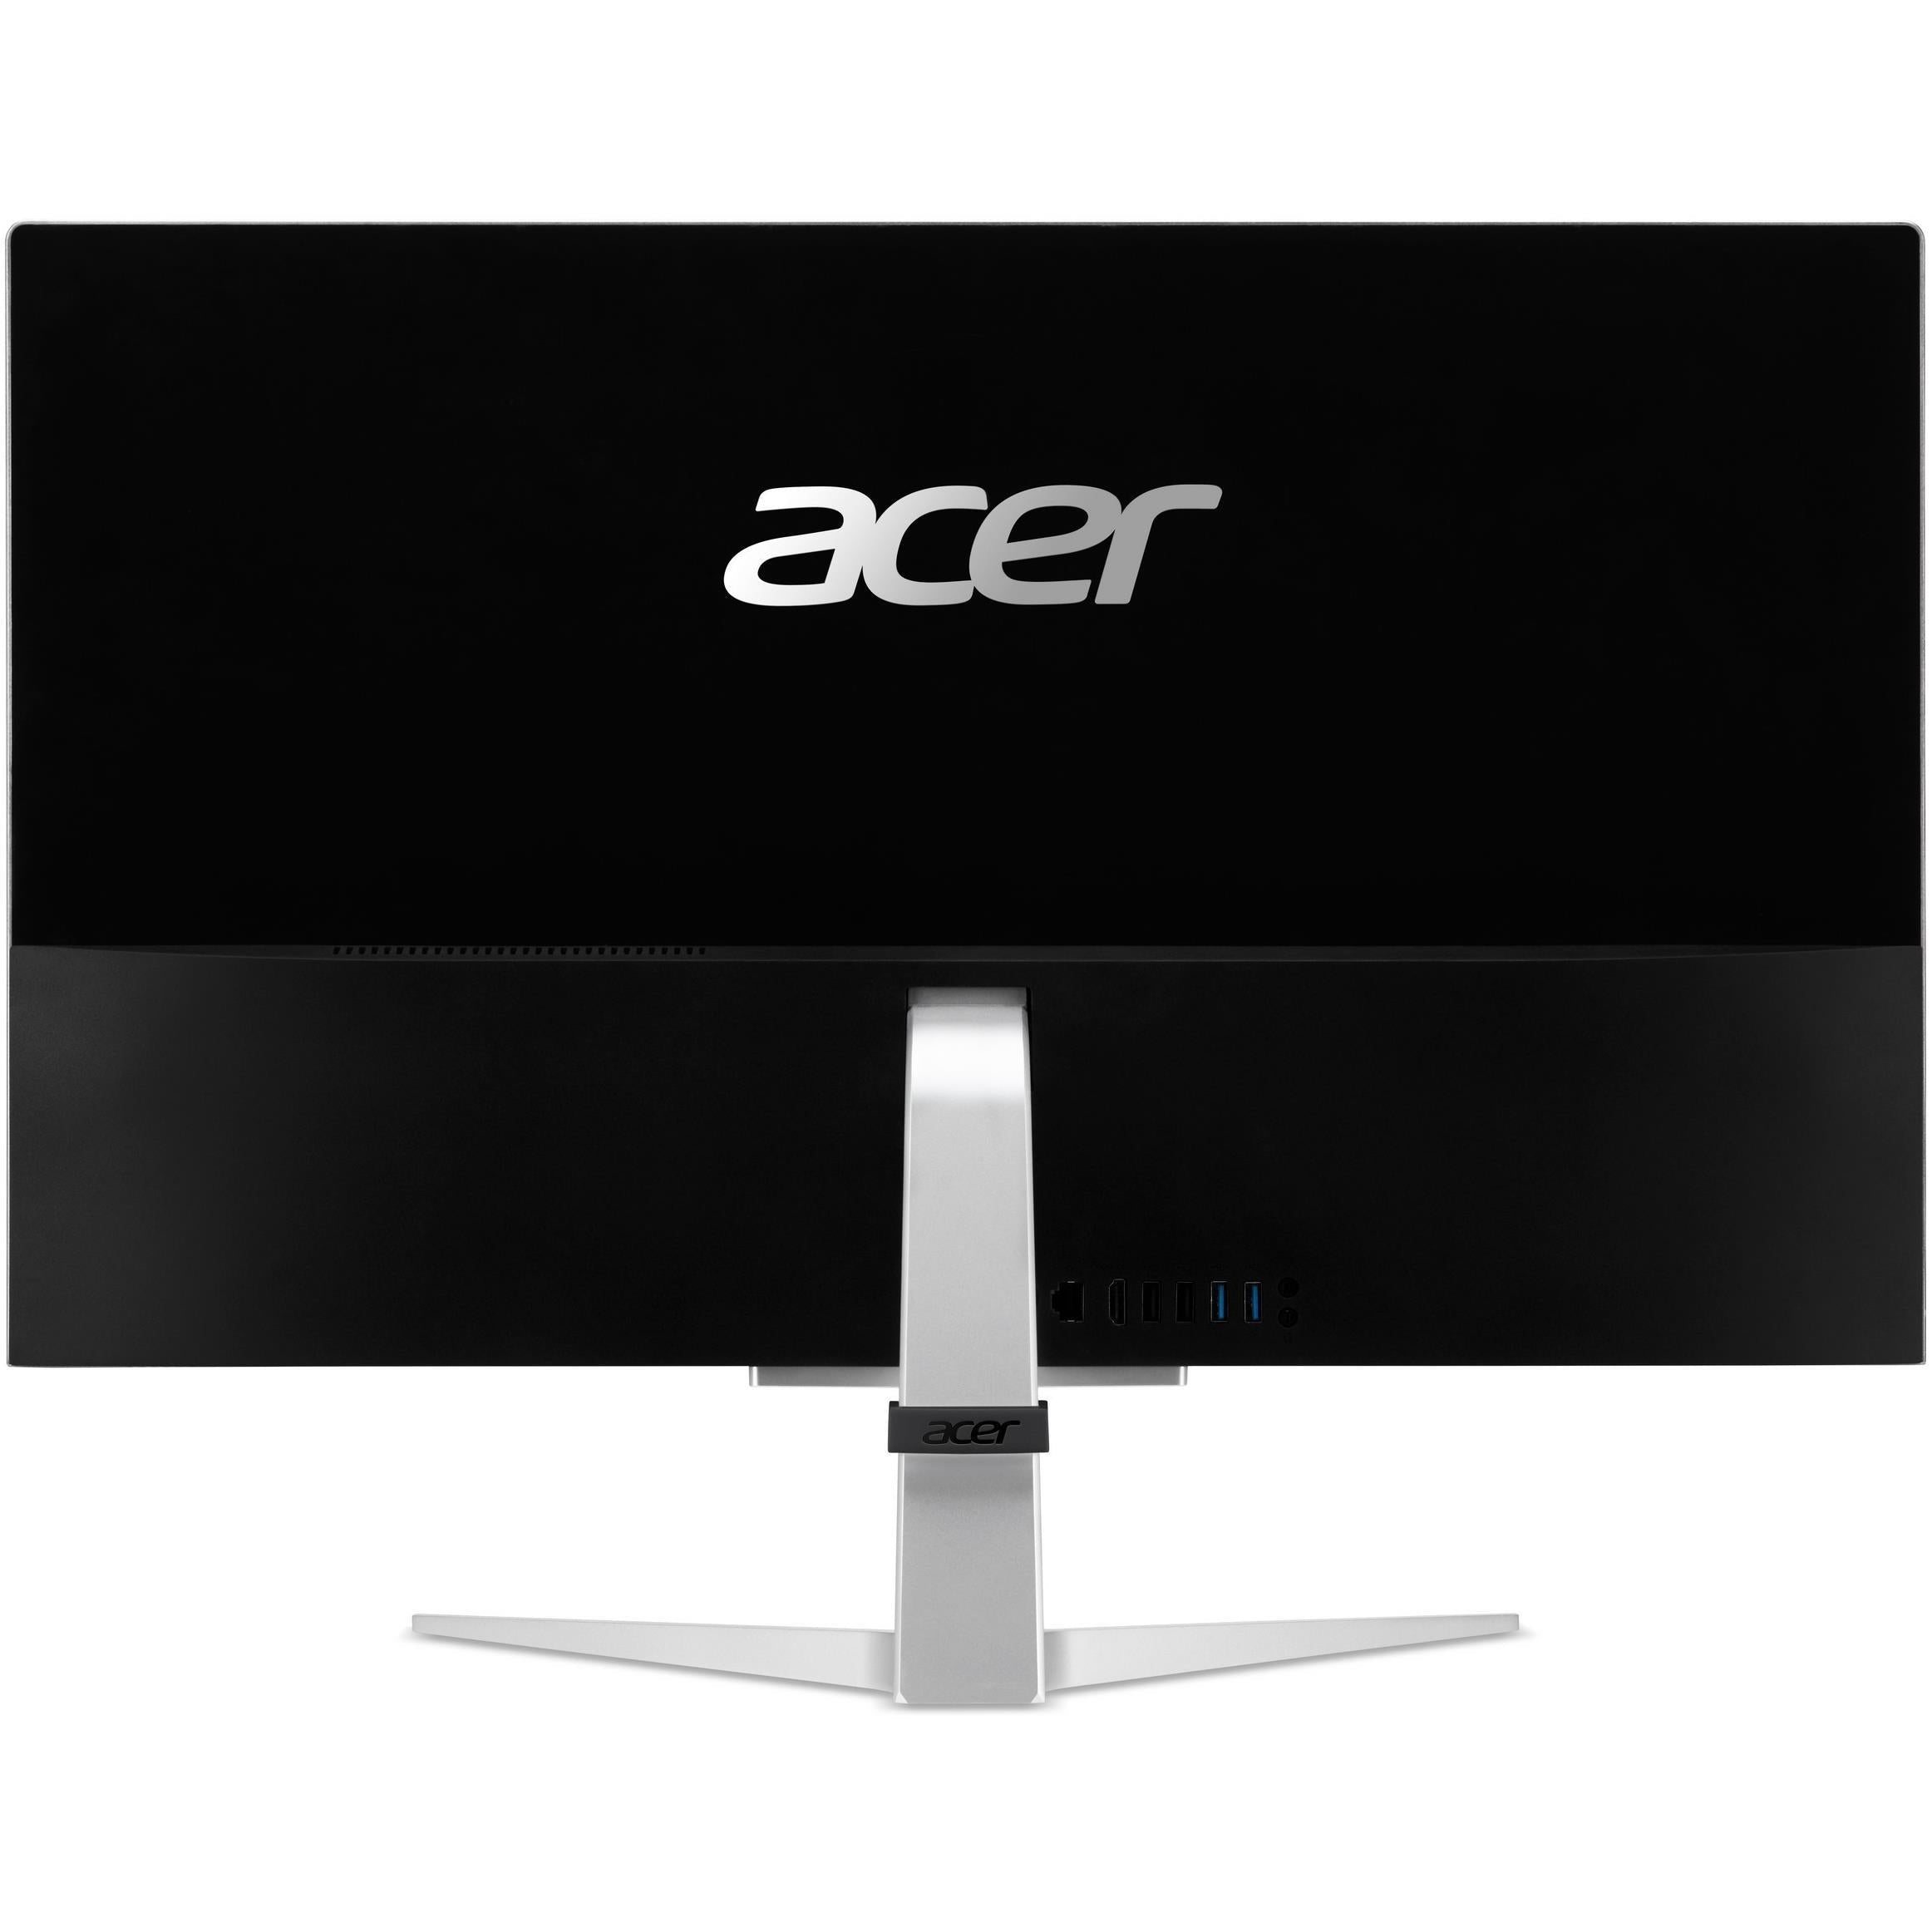 Acer Aspire C27-962 Home All-In-One Desktop PC, Intel Core i5, 8GB RAM, 1TB HDD & 128GB SSD, Silver